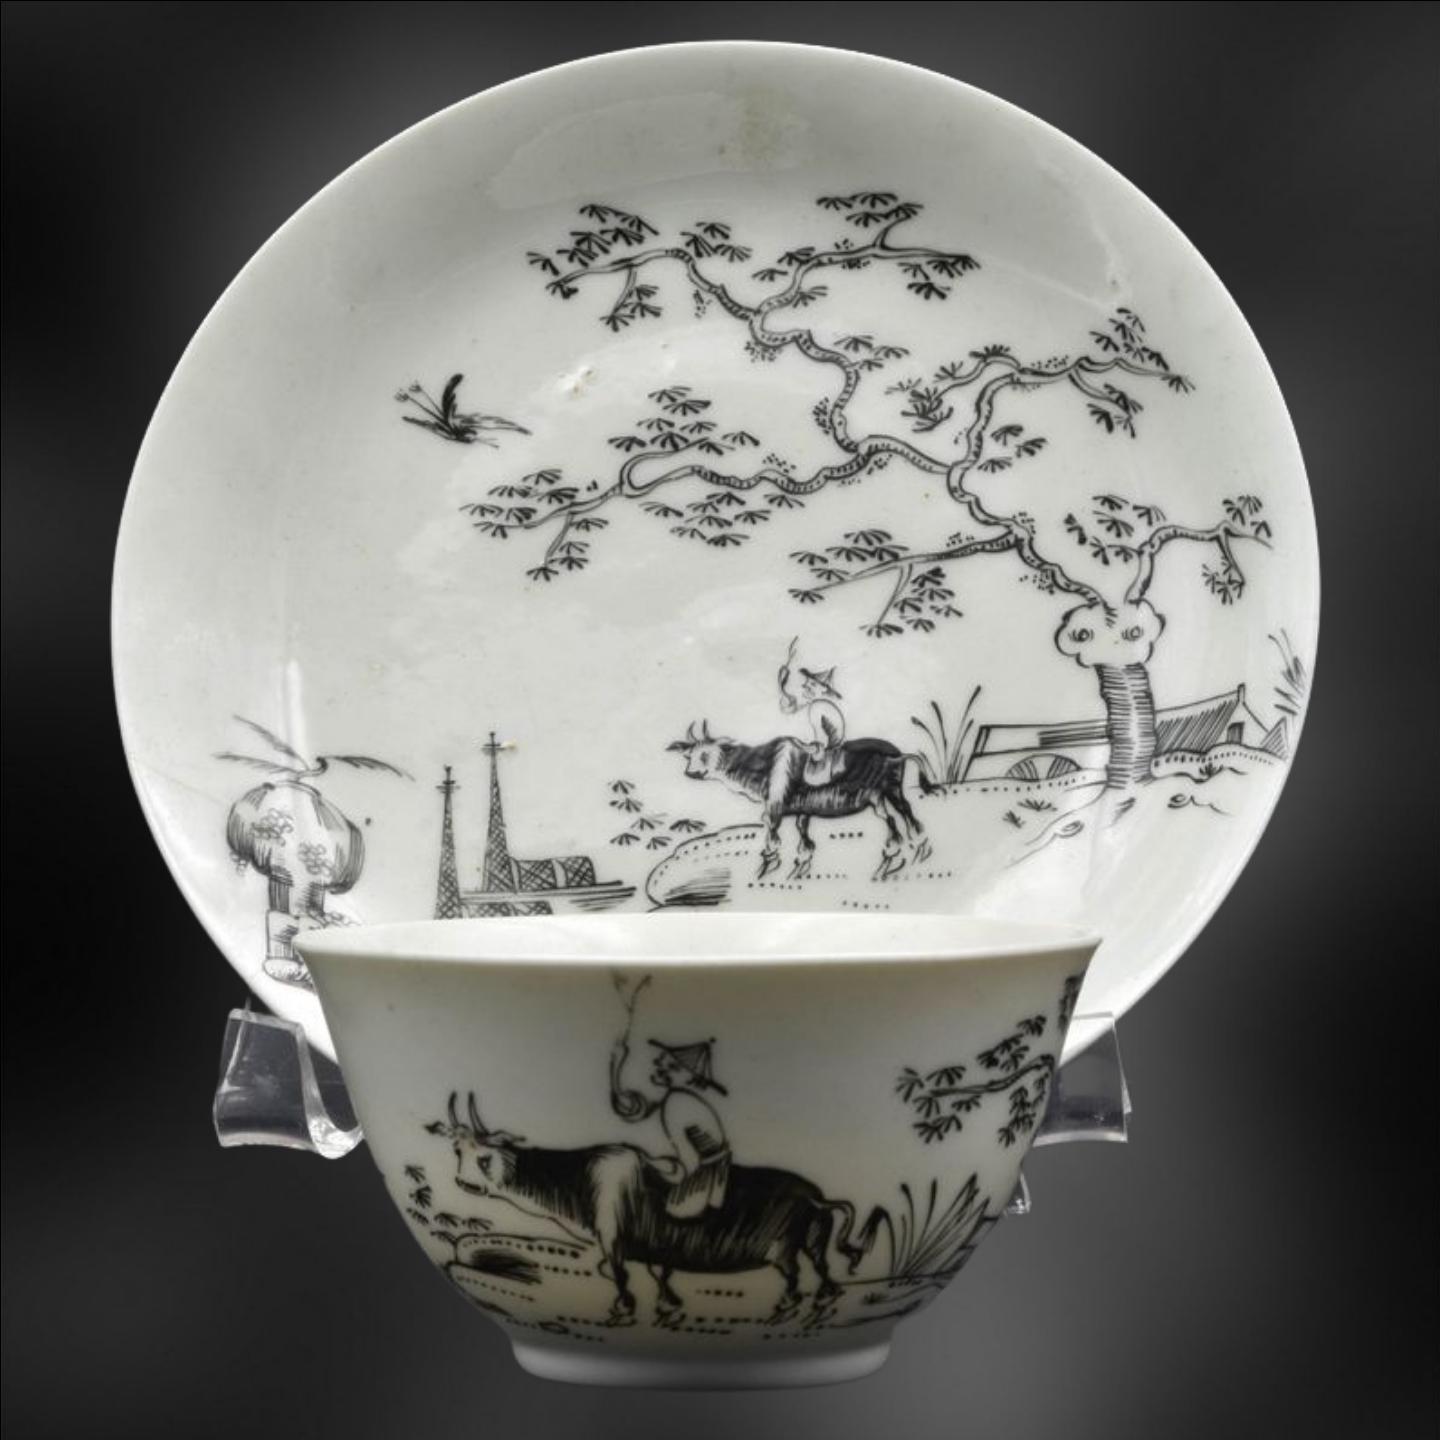 A very fine tea-bowl and saucer, with a pencilled decoration of the pattern Boy on a Buffalo, after the Chinese.

The porcelain is eggshell-thin, something Worcester did for only a short time; although the result is quite stunning, the failure